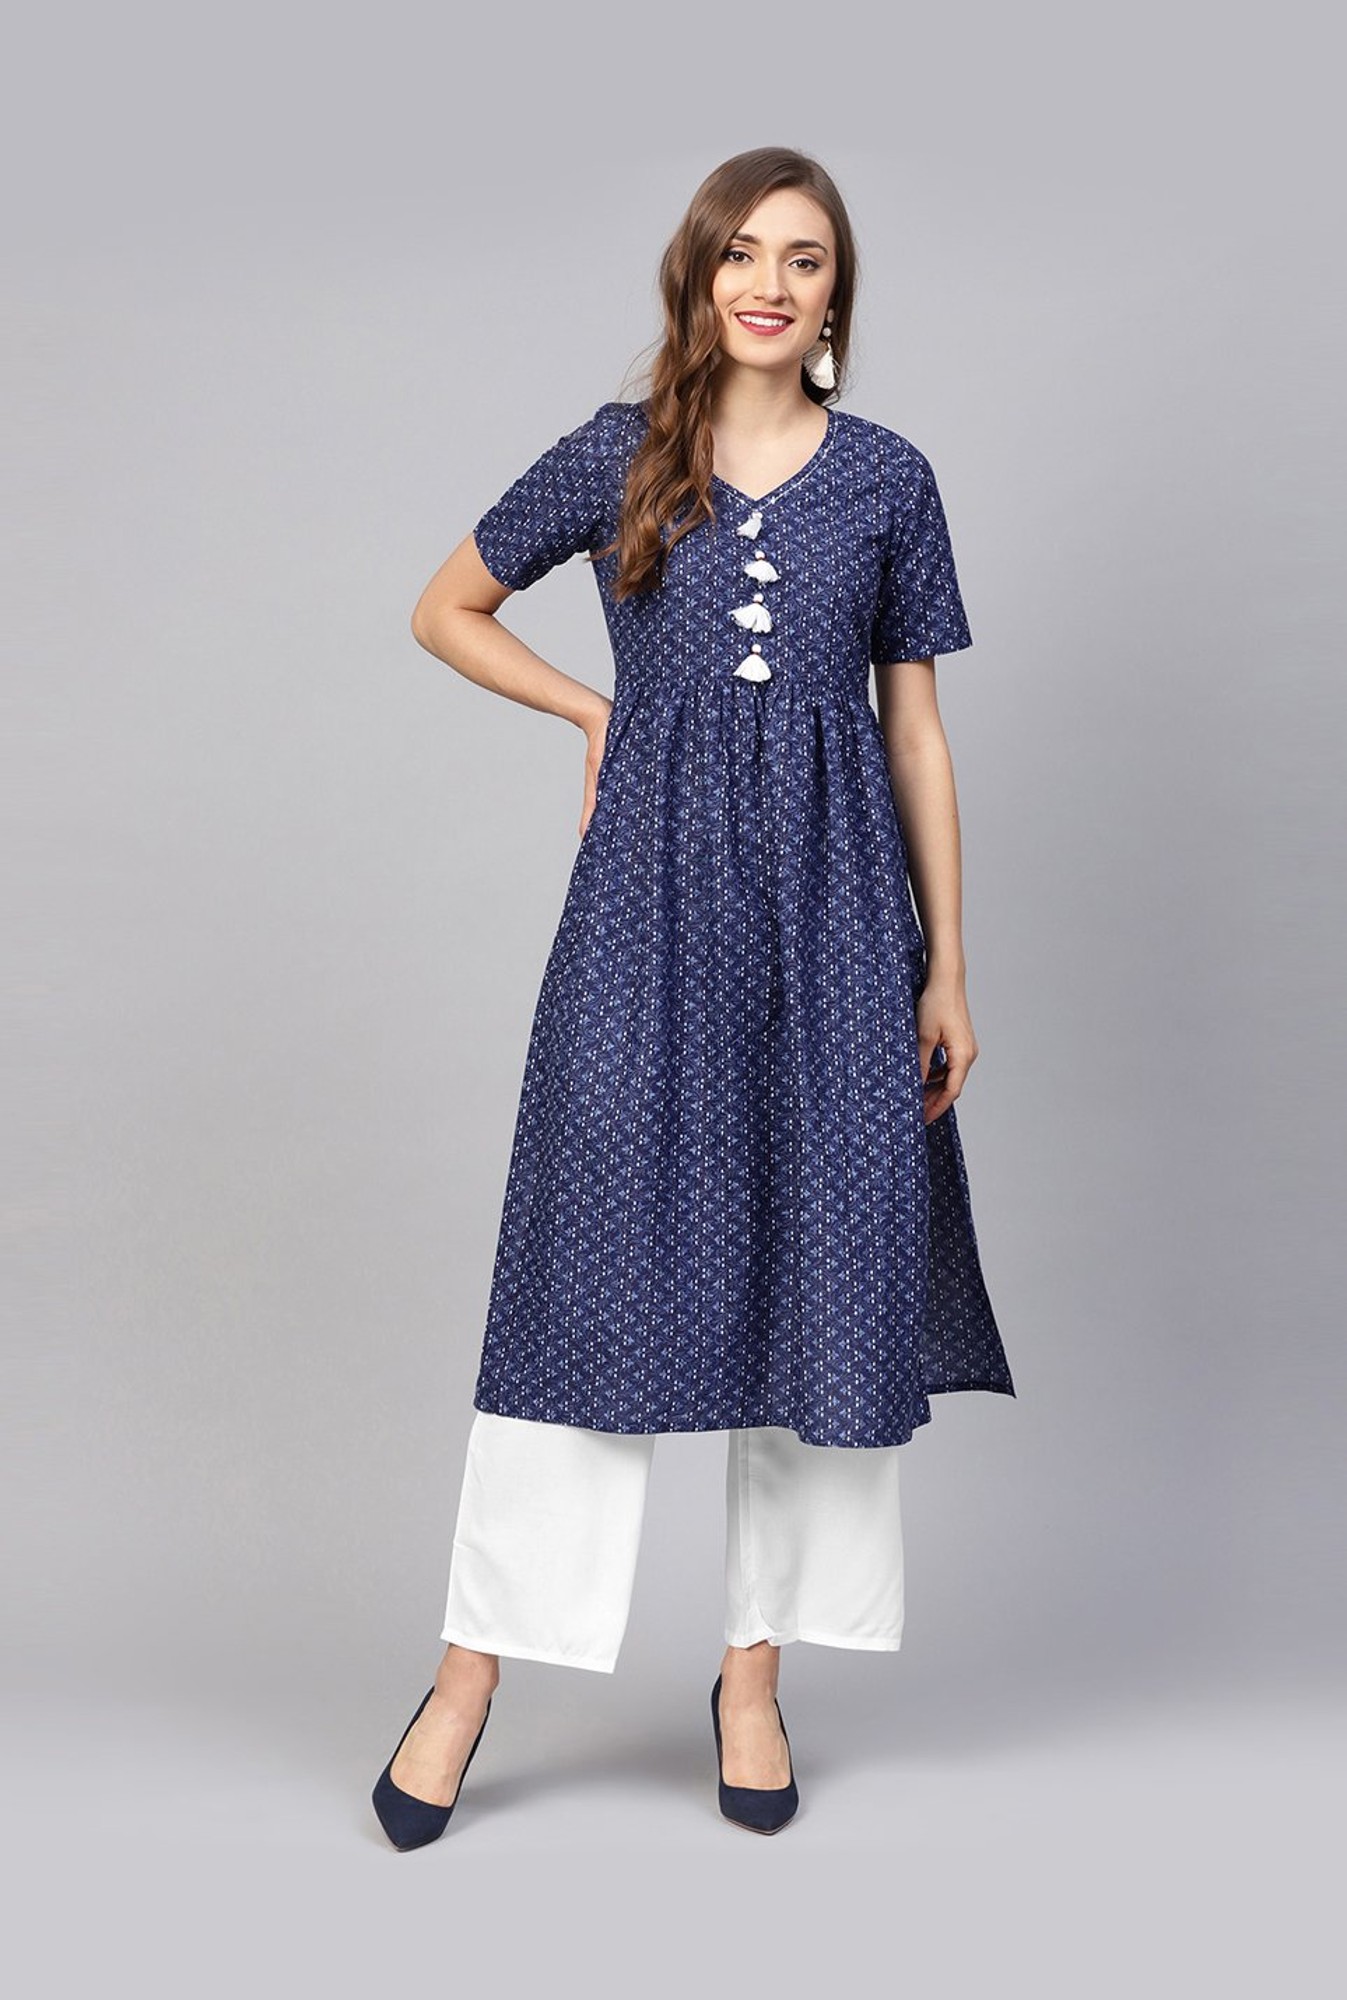 Inddus Blue  White Embroidered Kurti Palazzo Set Price in India Full  Specifications  Offers  DTashioncom